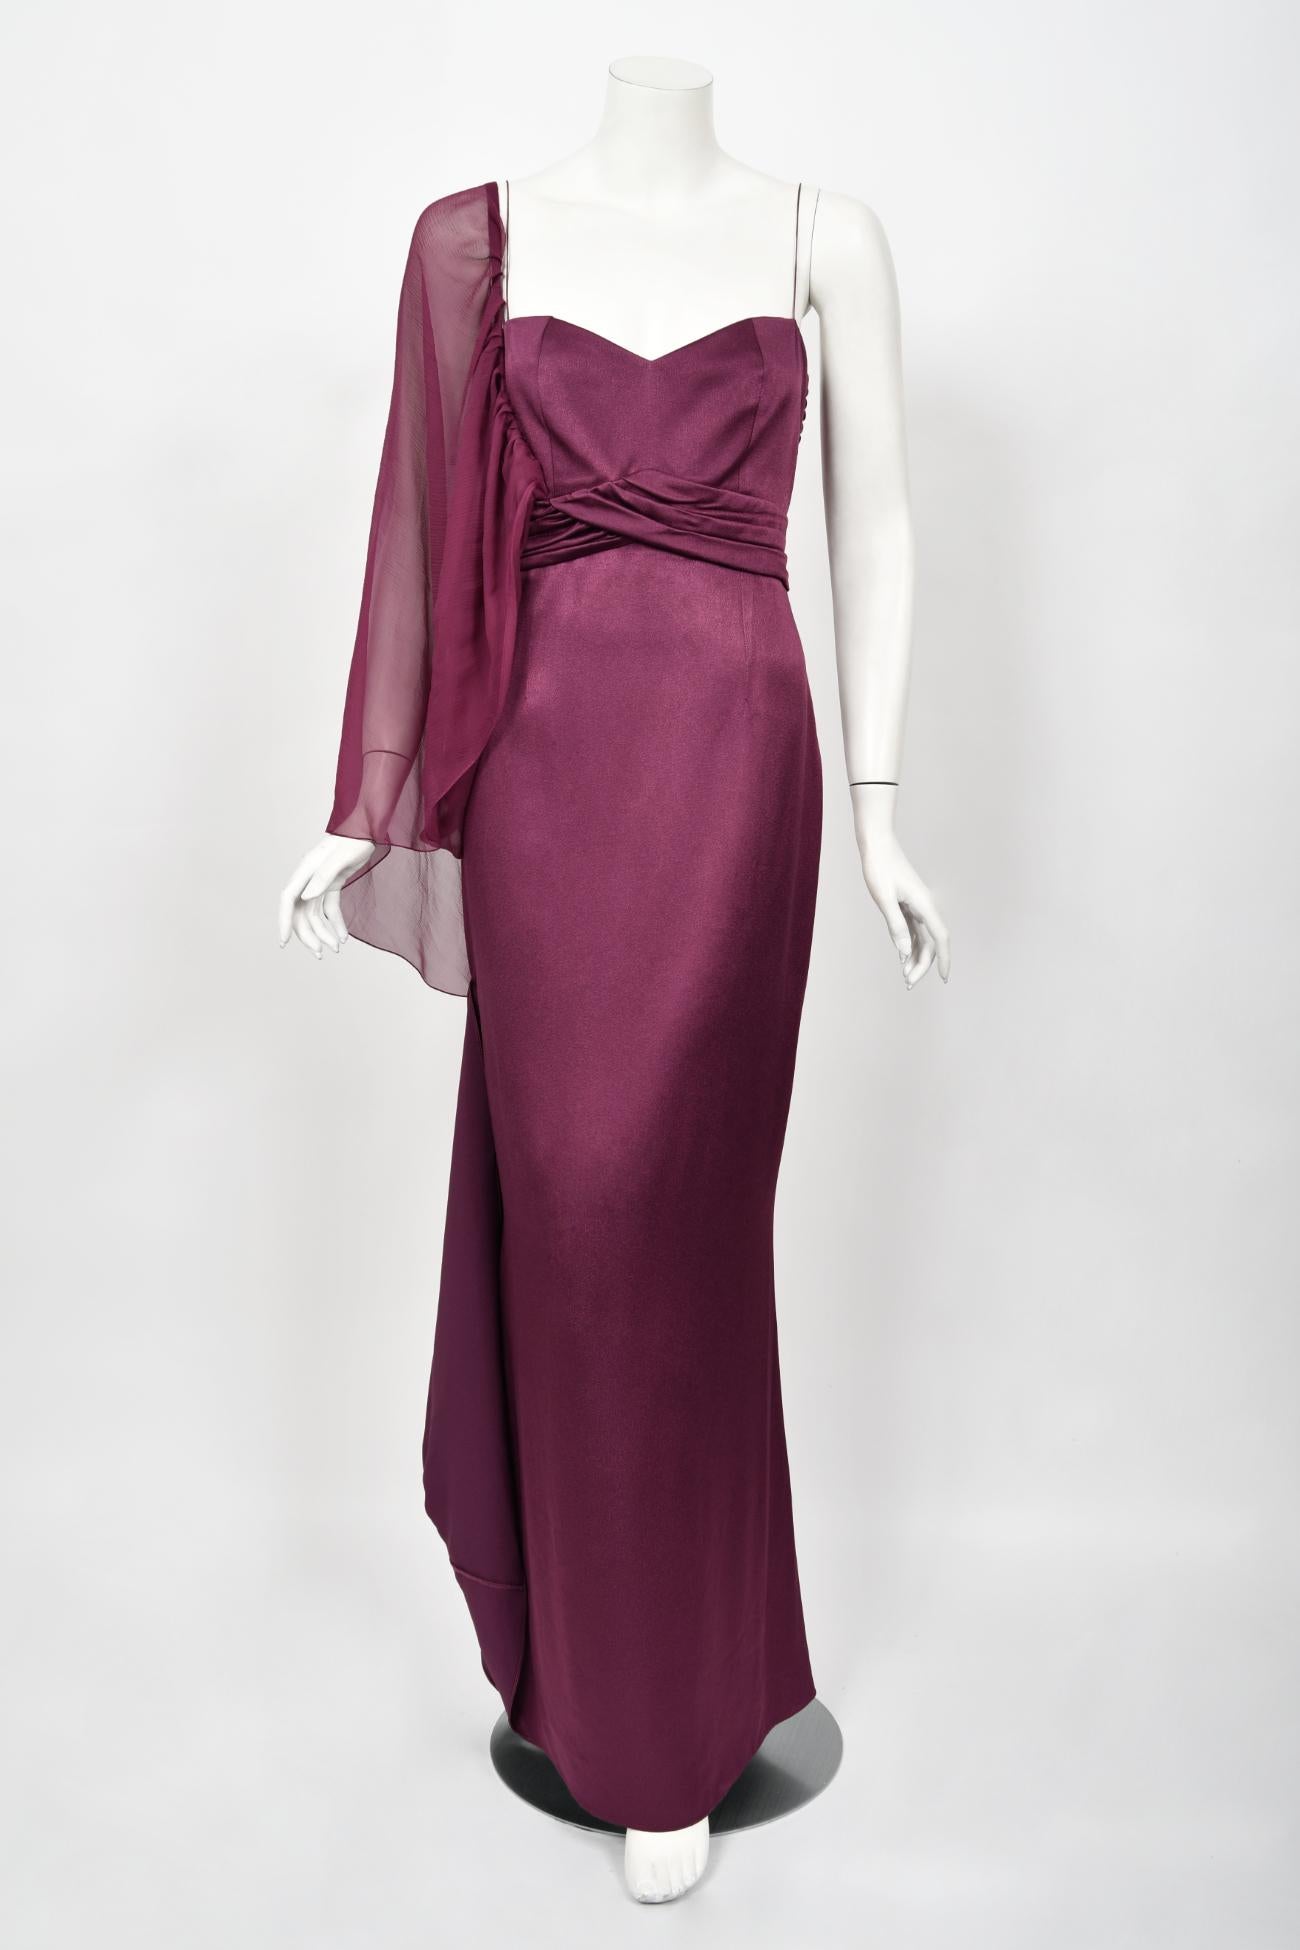 2000 Christian Dior by Galliano Purple Silk Sheer-Sleeve Asymmetric Draped Gown For Sale 6